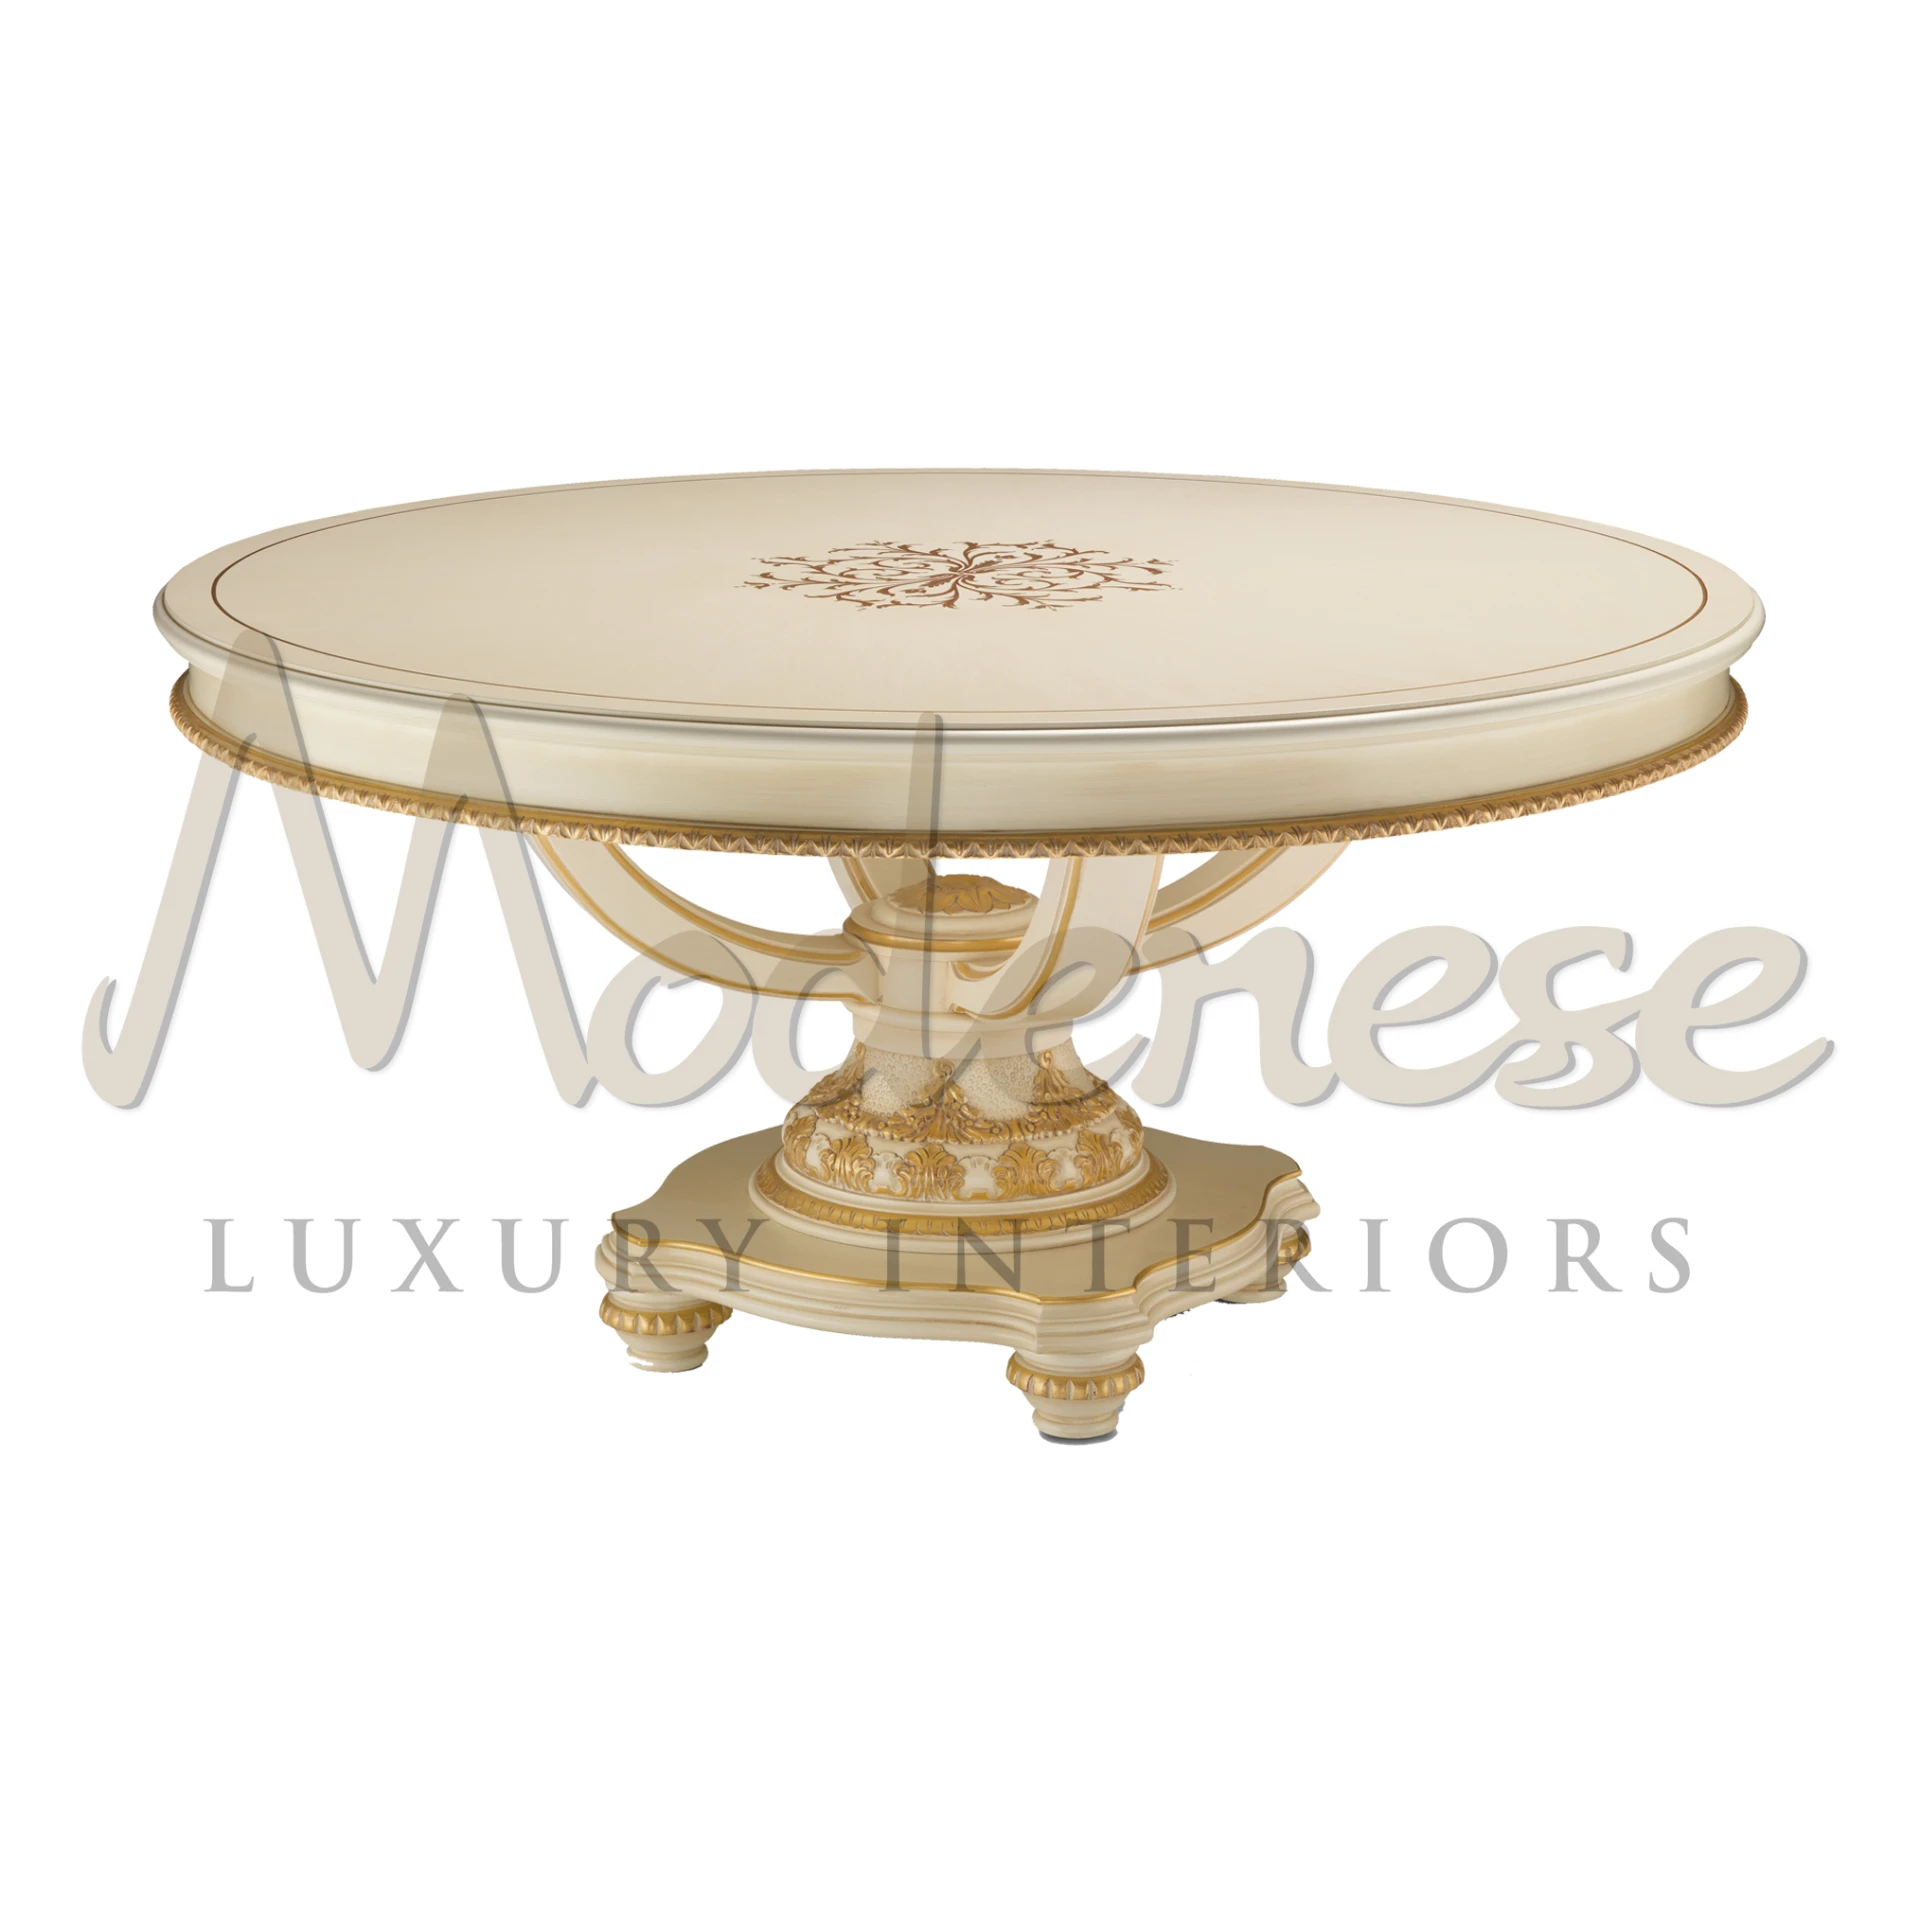 Renaissance round dining table with fancy carvings, by Modenese Luxury Furniture.